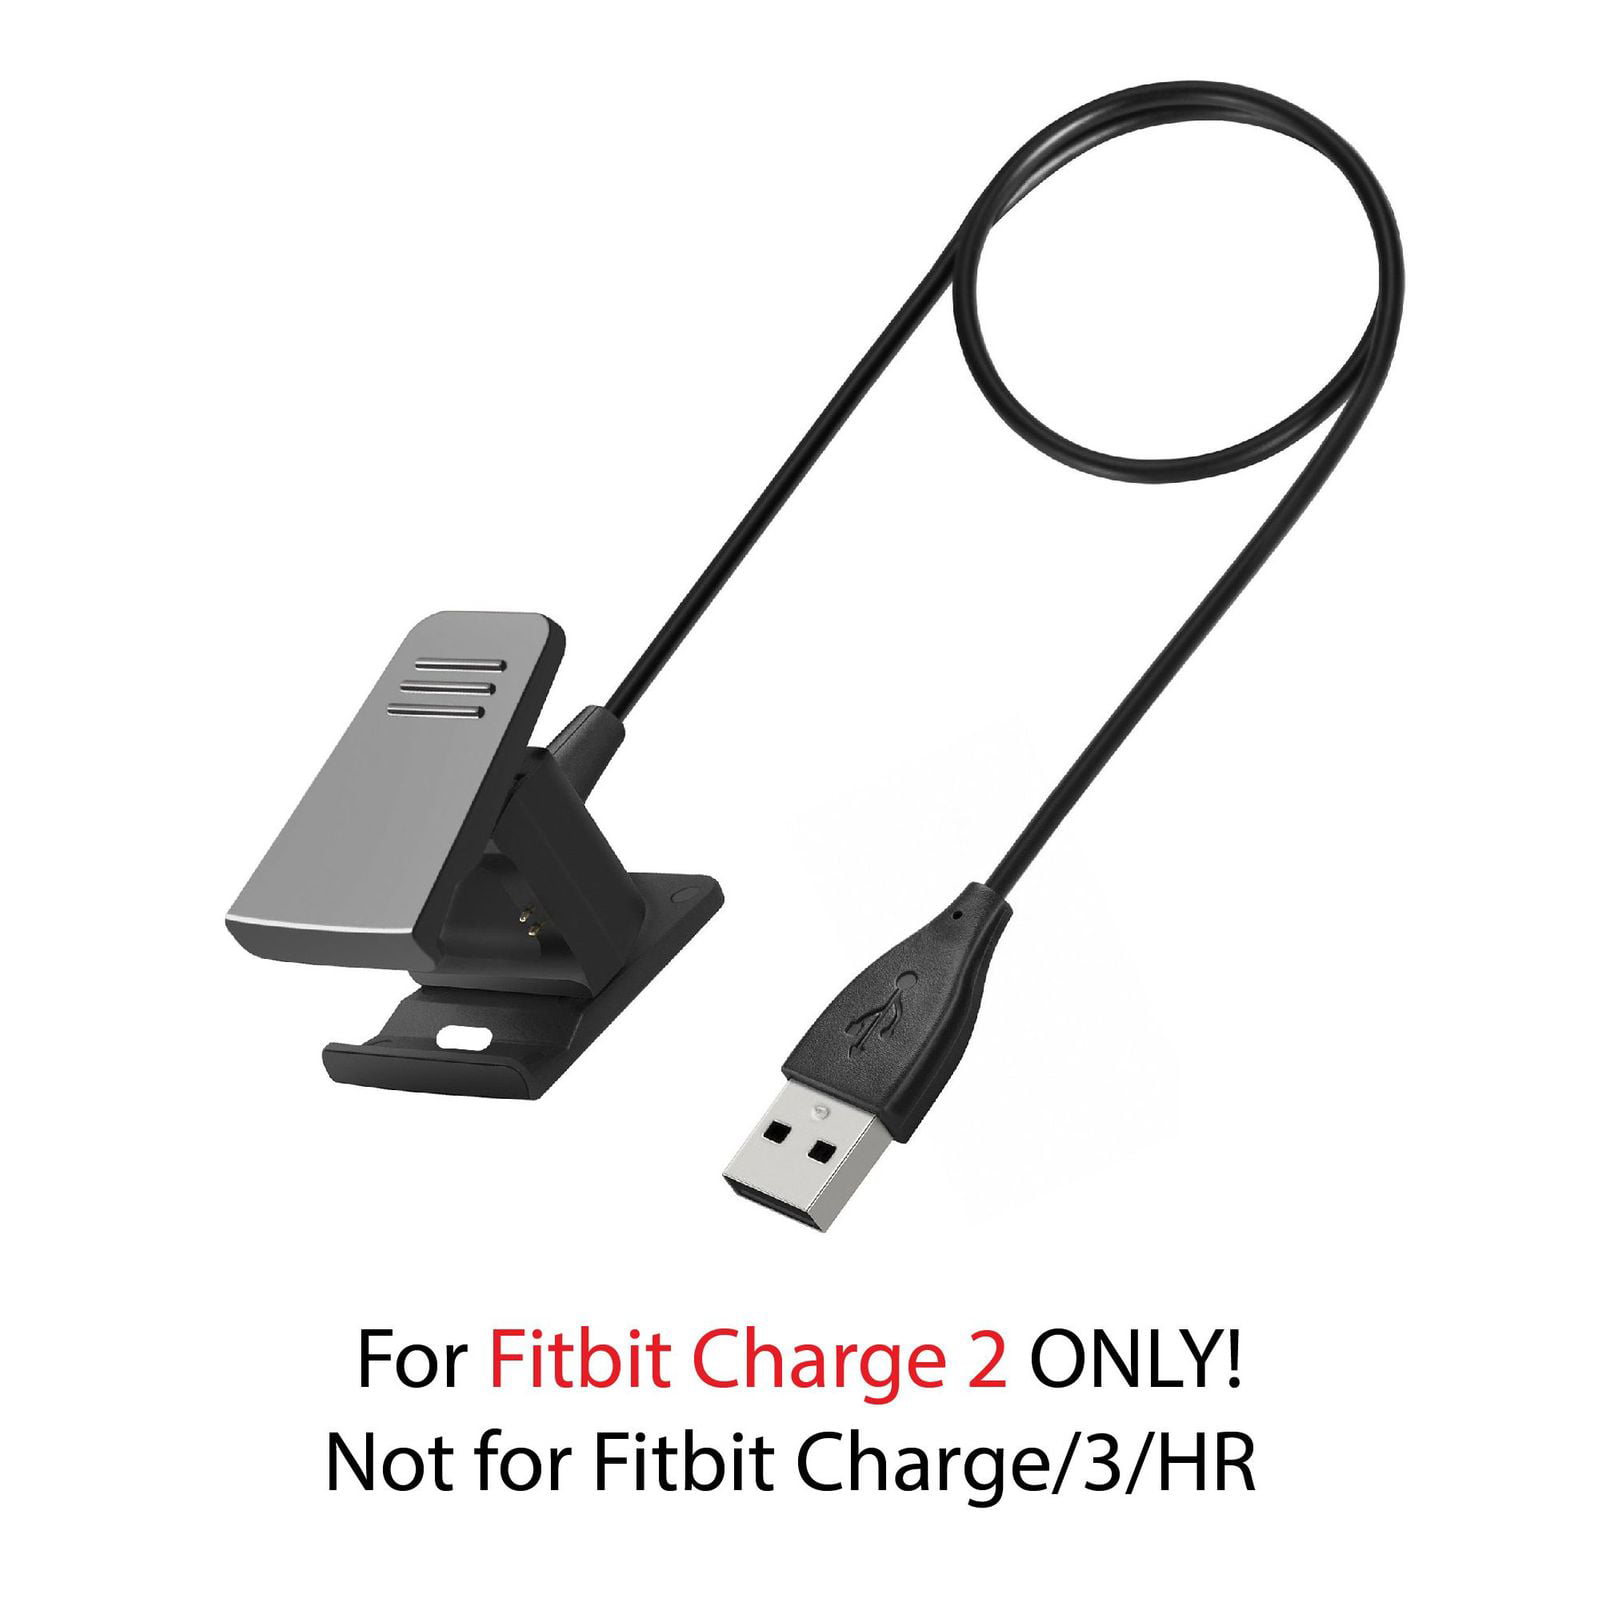 Fitbit Charge HR cord No Box Shwroom Mdl Tested 100% Works Size SMALL 